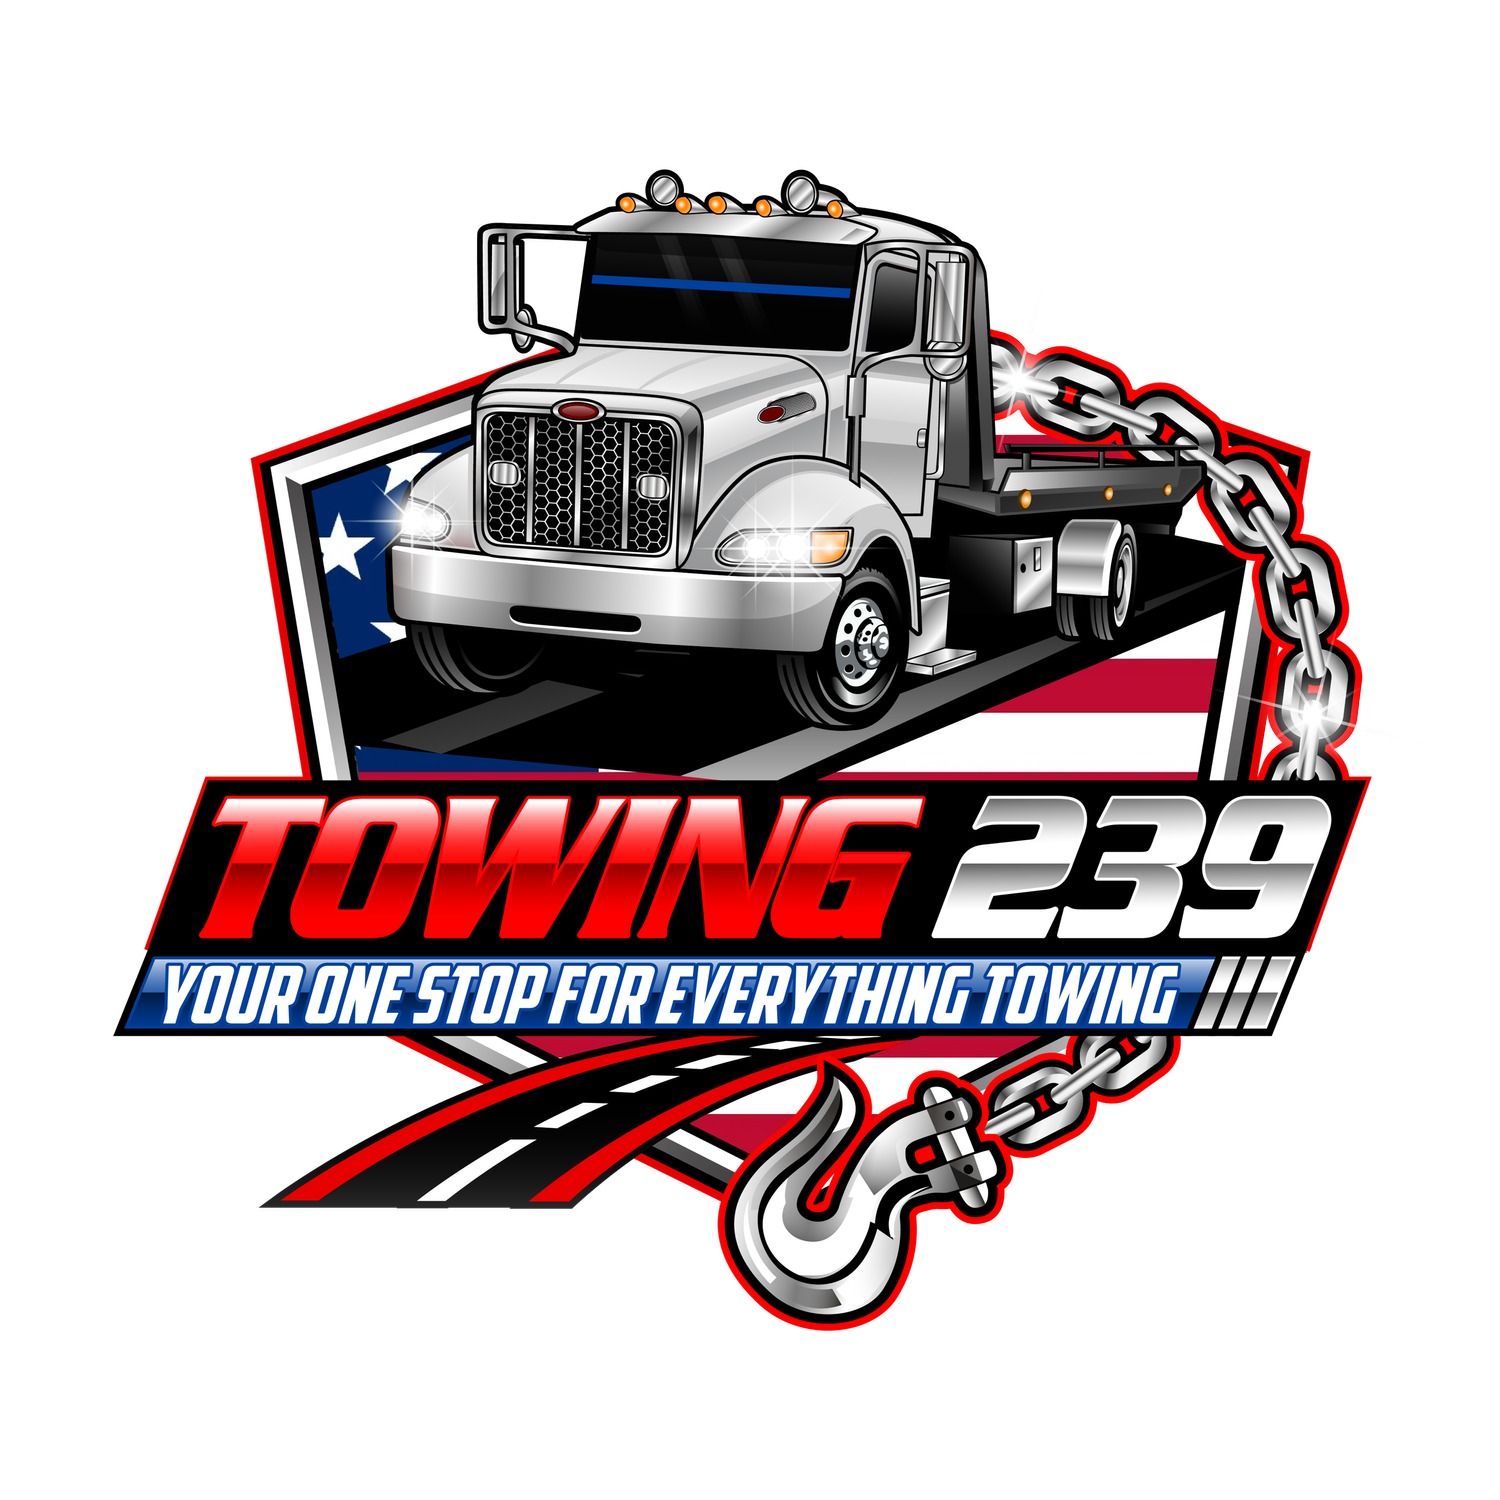 Towing 239